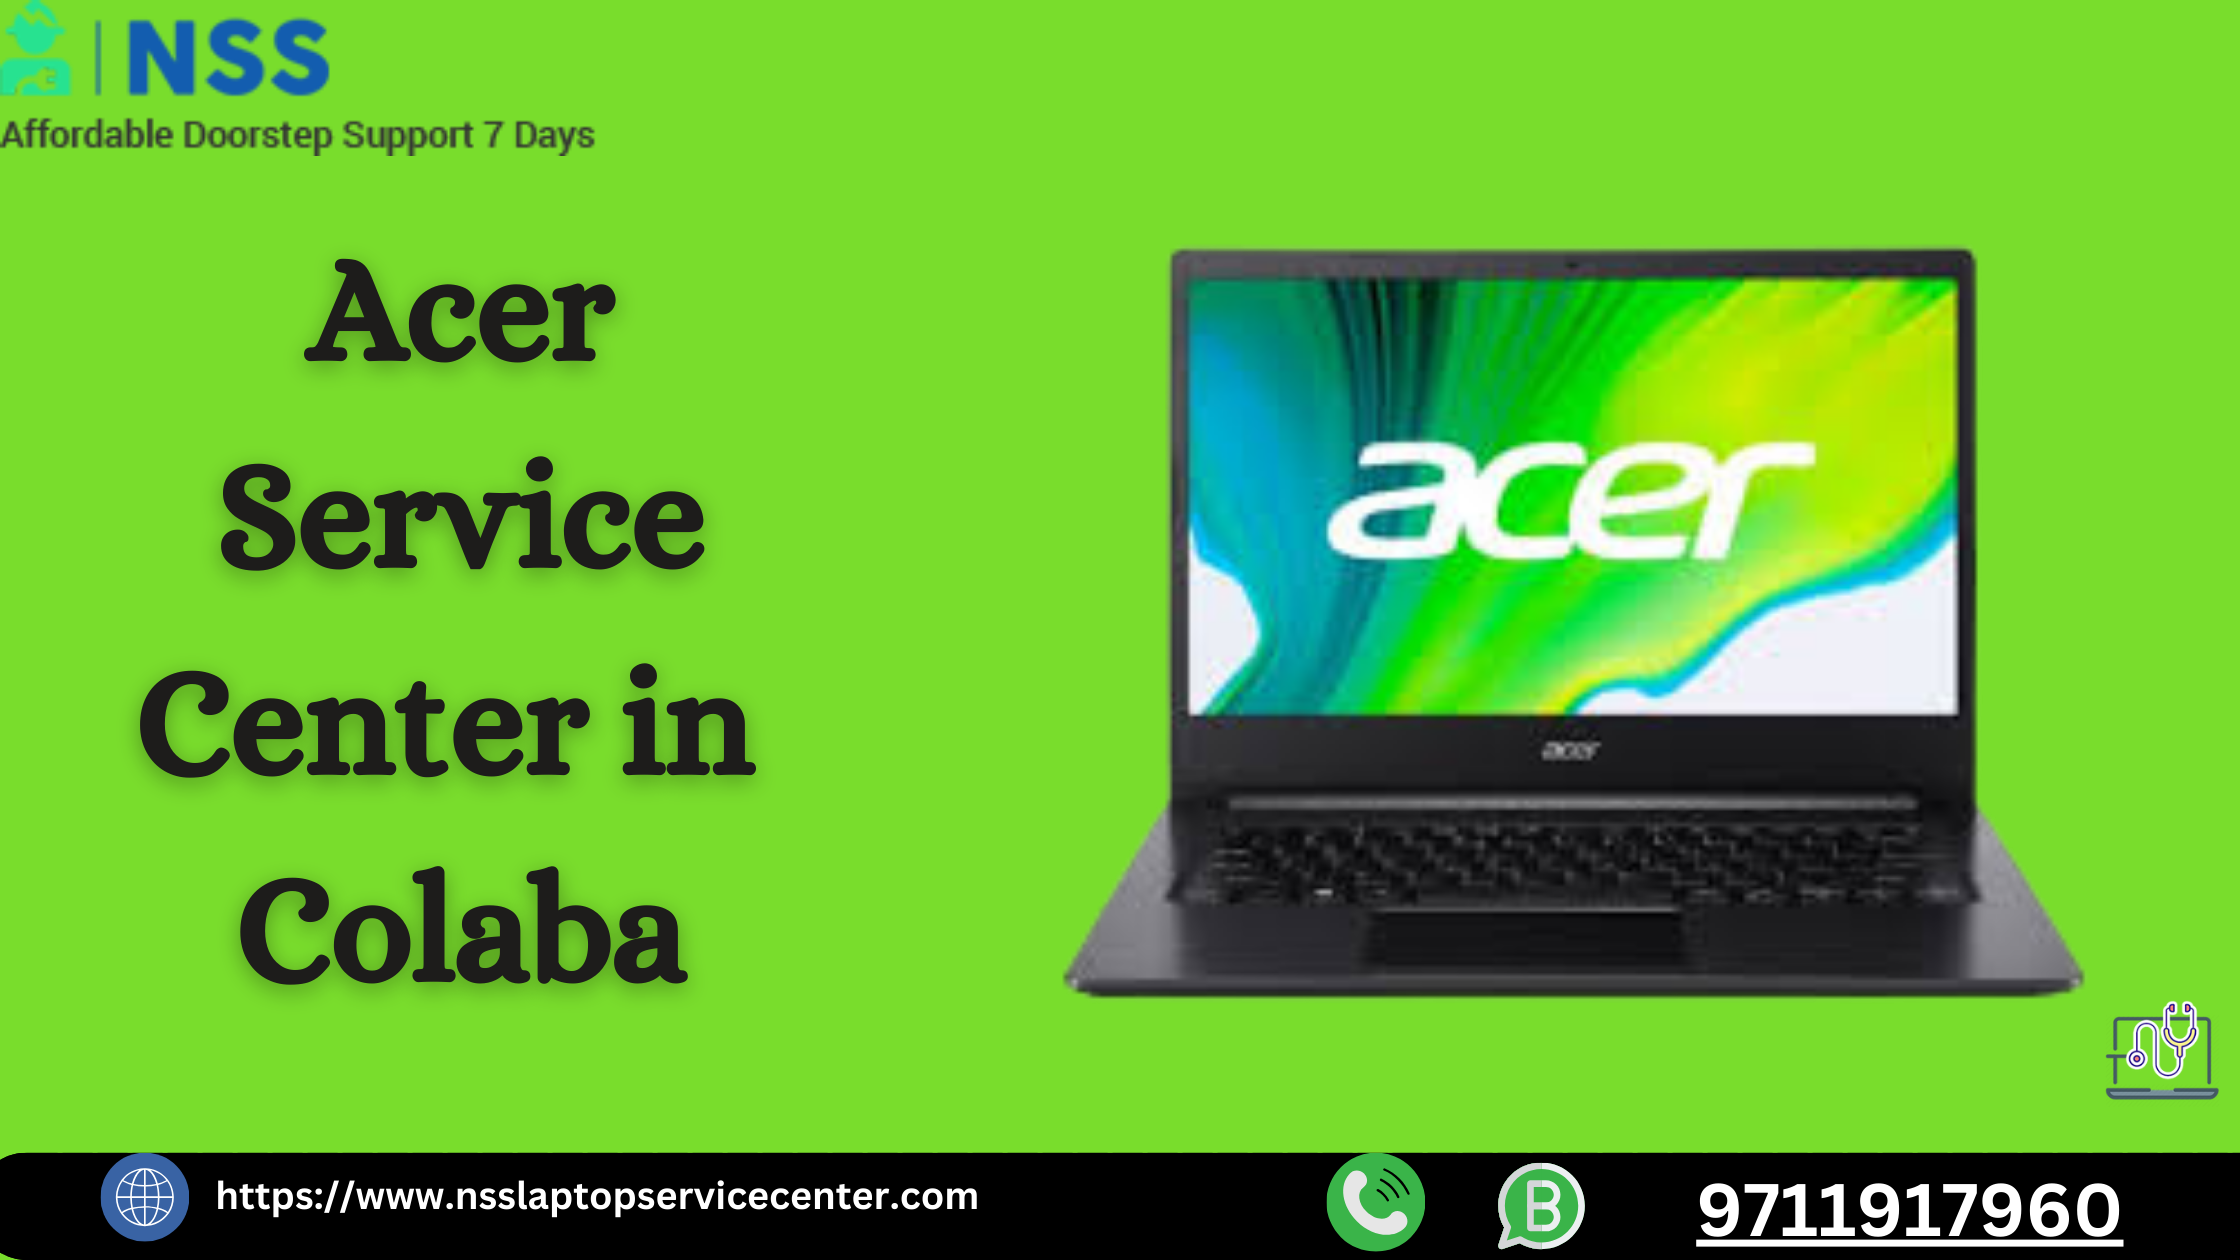 Are You Looking Acer Service Center in Colaba Near Mumbai